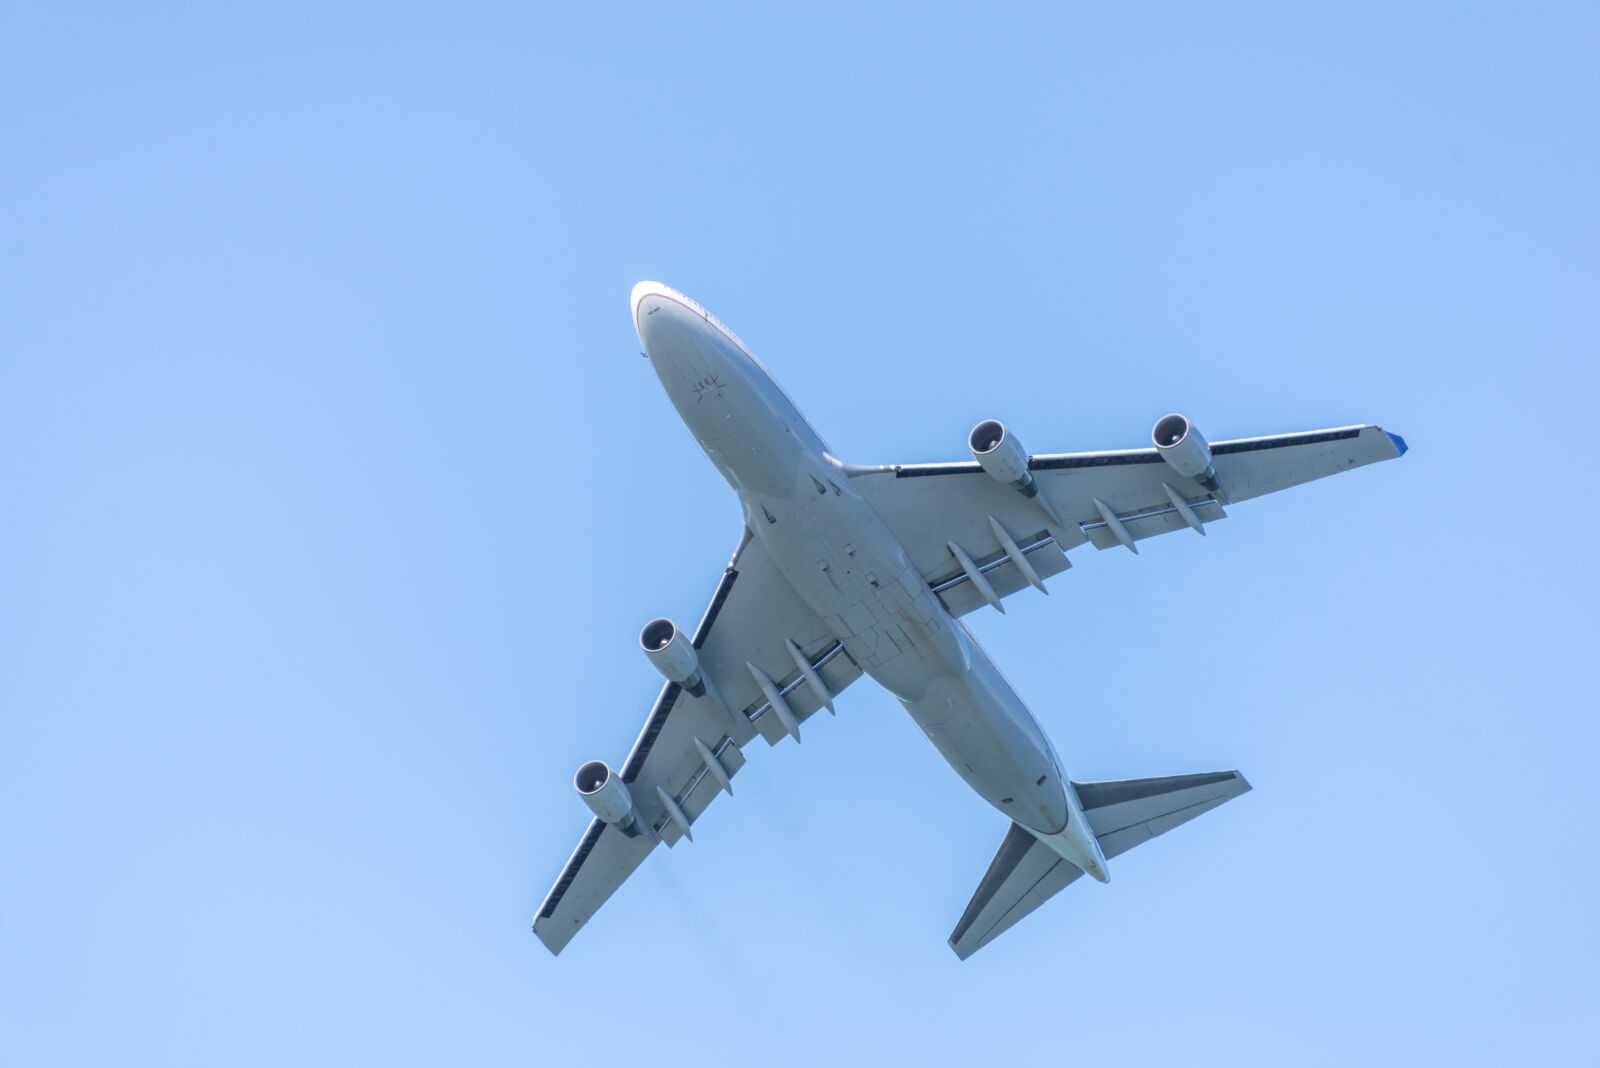 Nikon D600 sample photo. Airline, airplane, airplane, flying photography